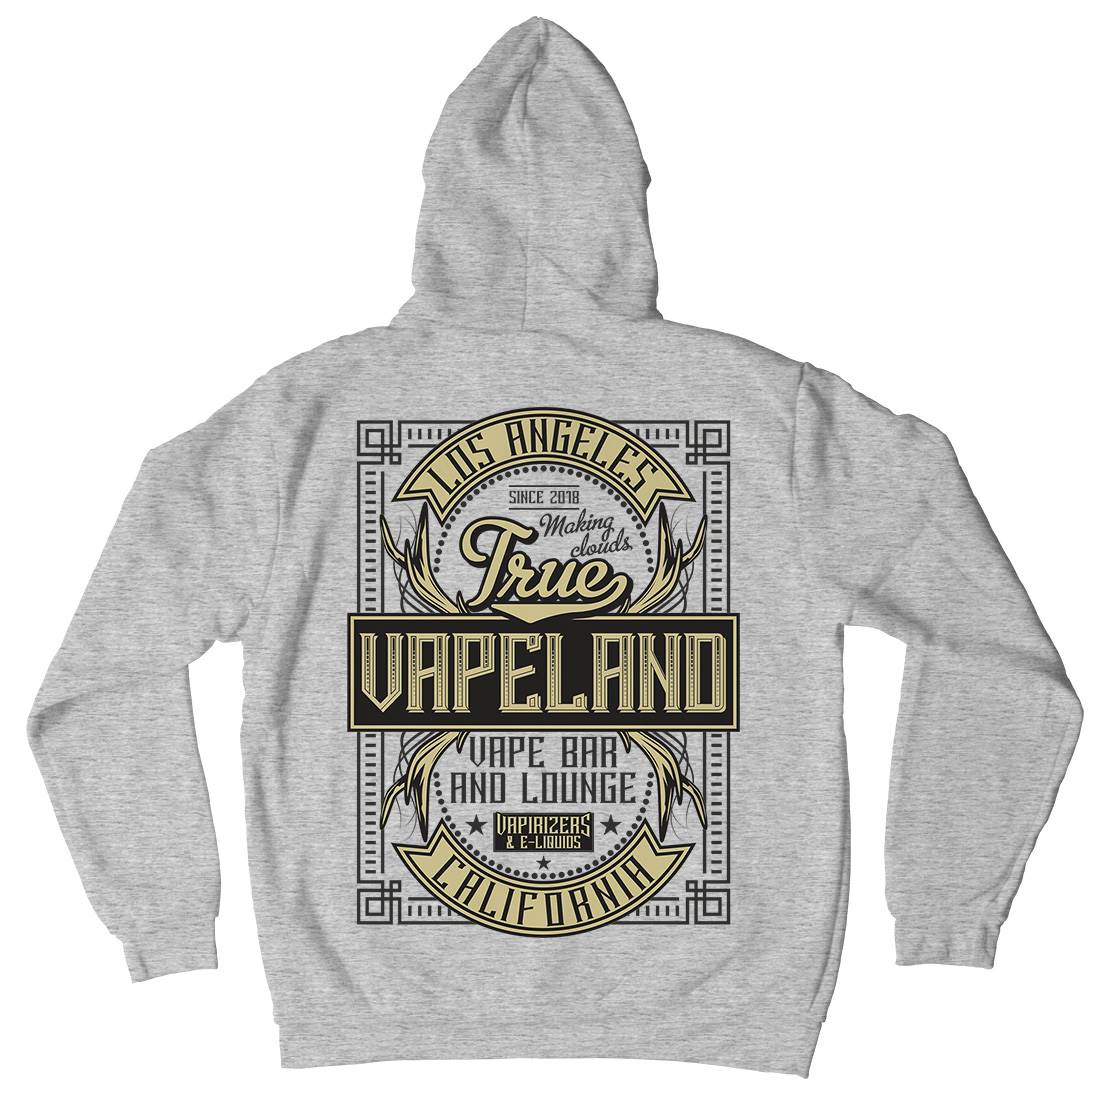 Vapeland Mens Hoodie With Pocket Drugs A396